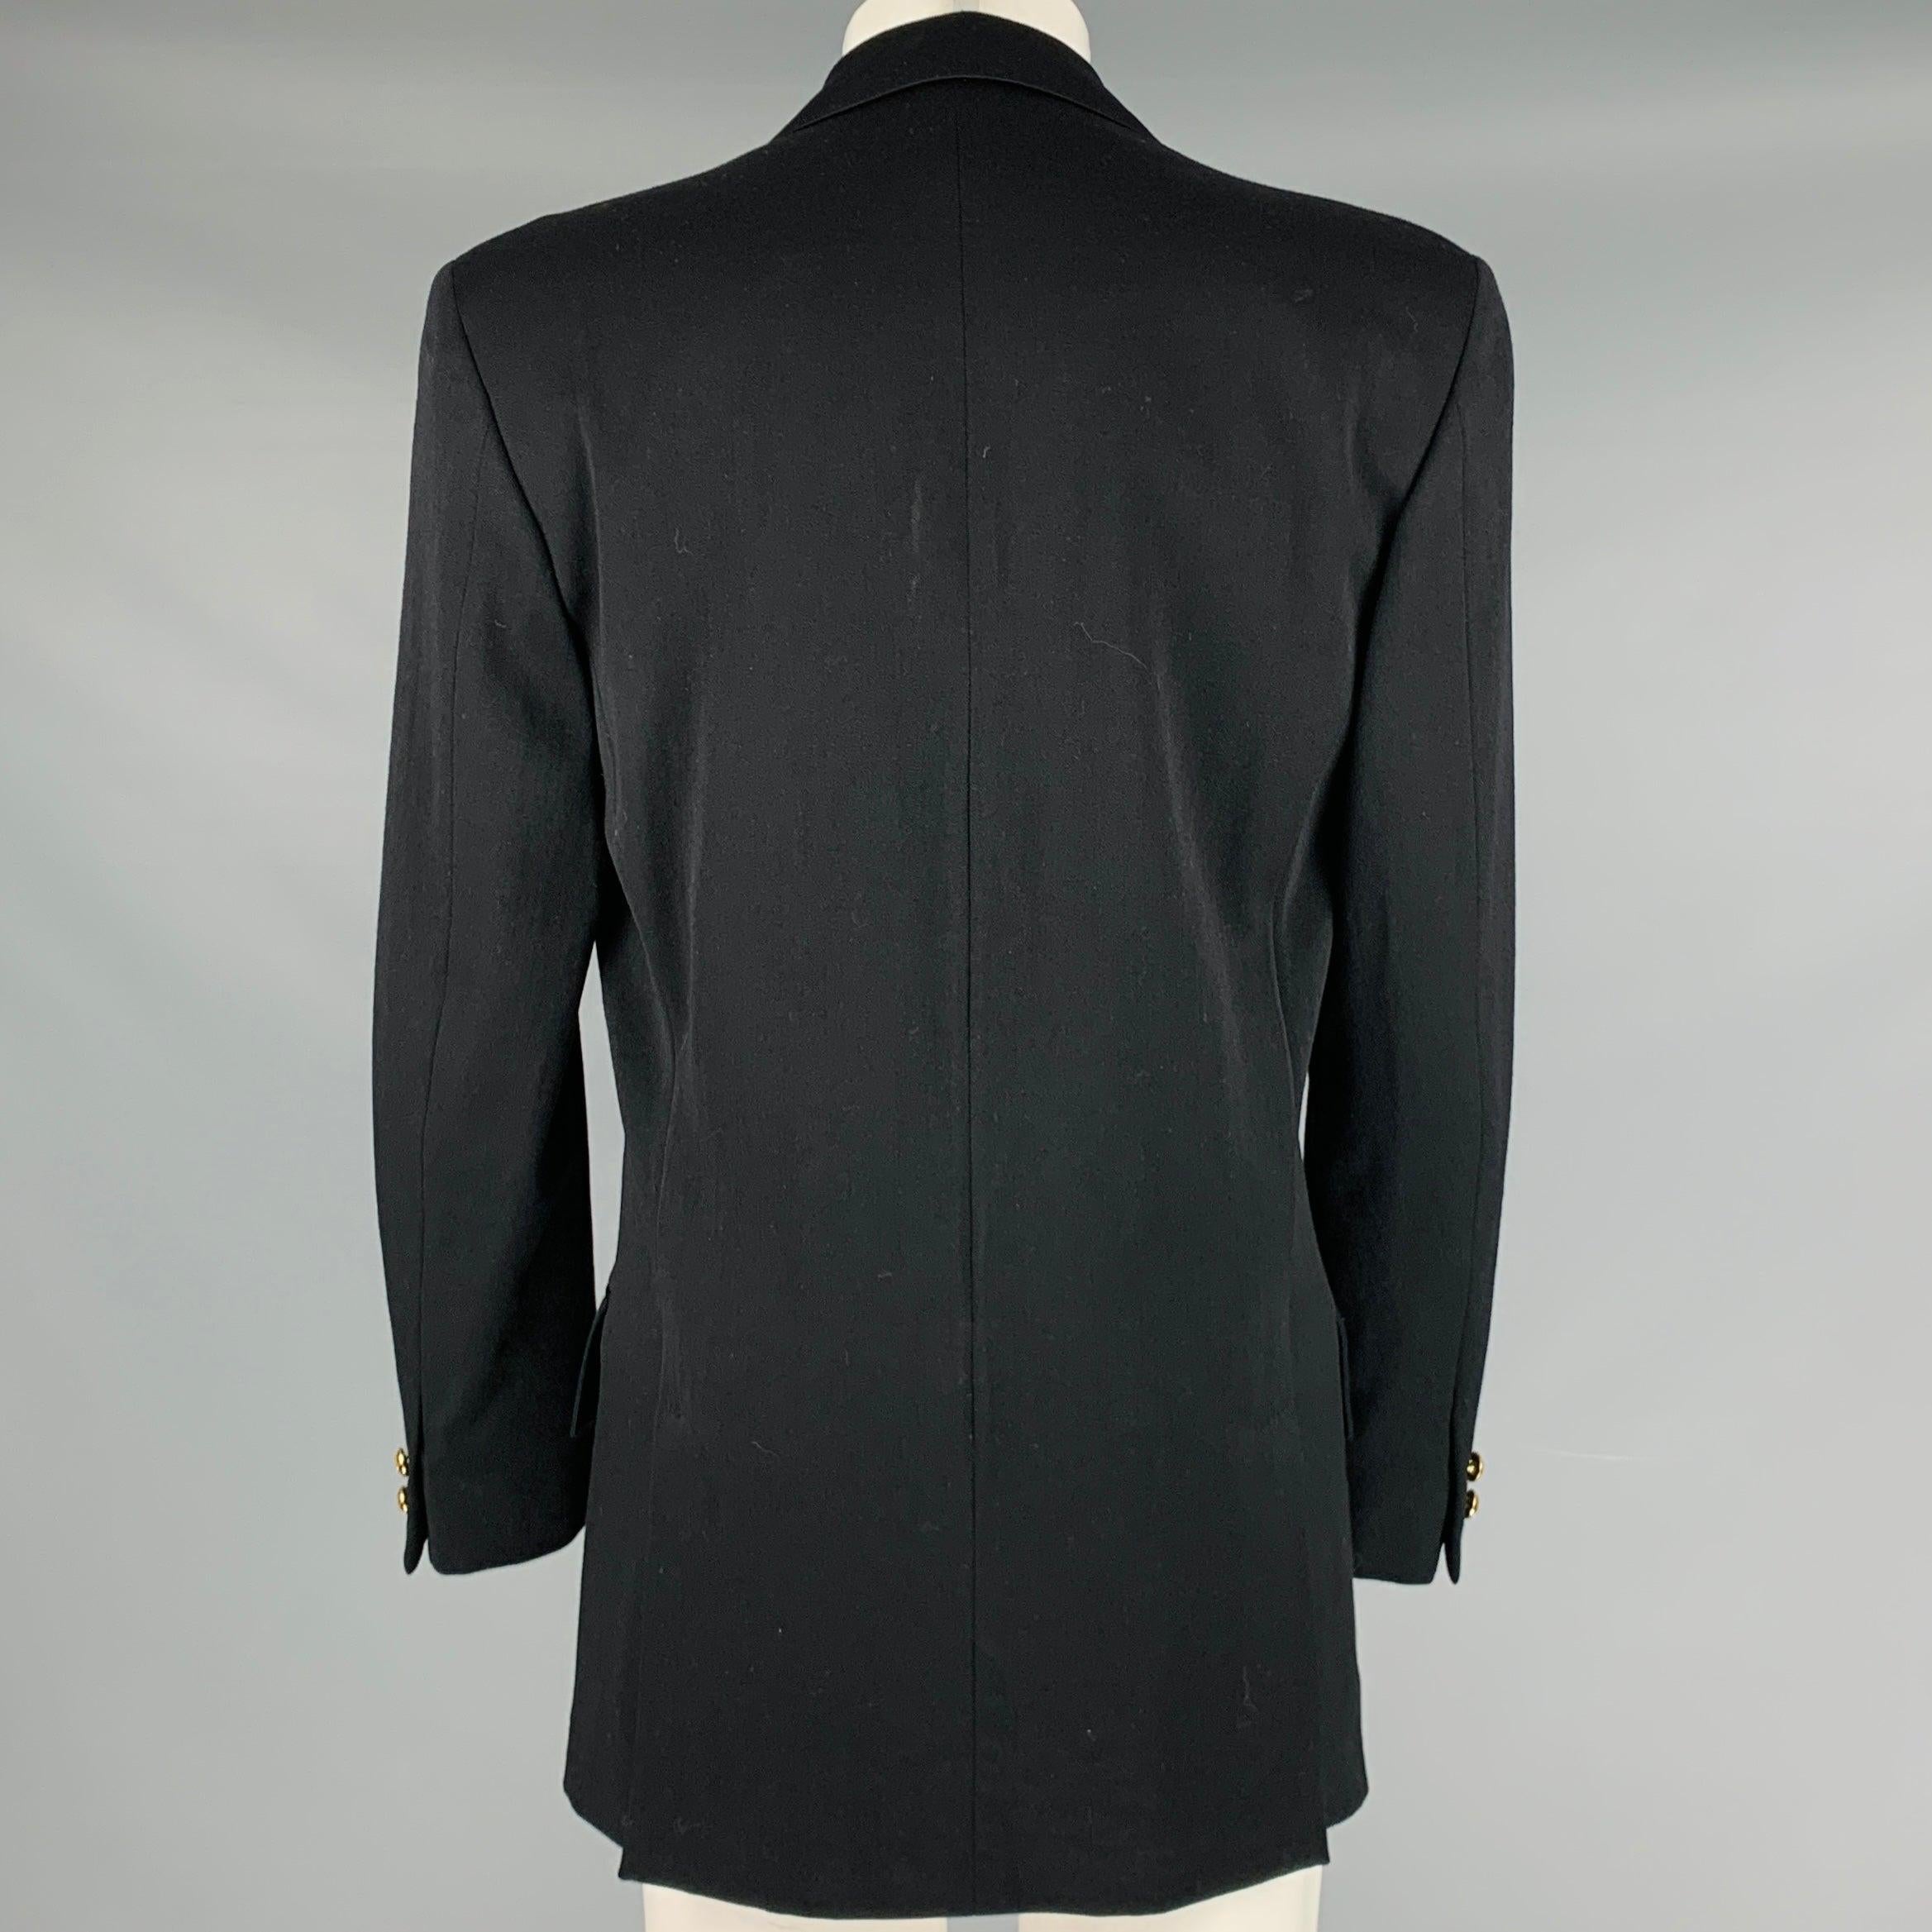 GIANNI VERSACE Size 40 Black Wool Single Breasted Jacket In Excellent Condition For Sale In San Francisco, CA